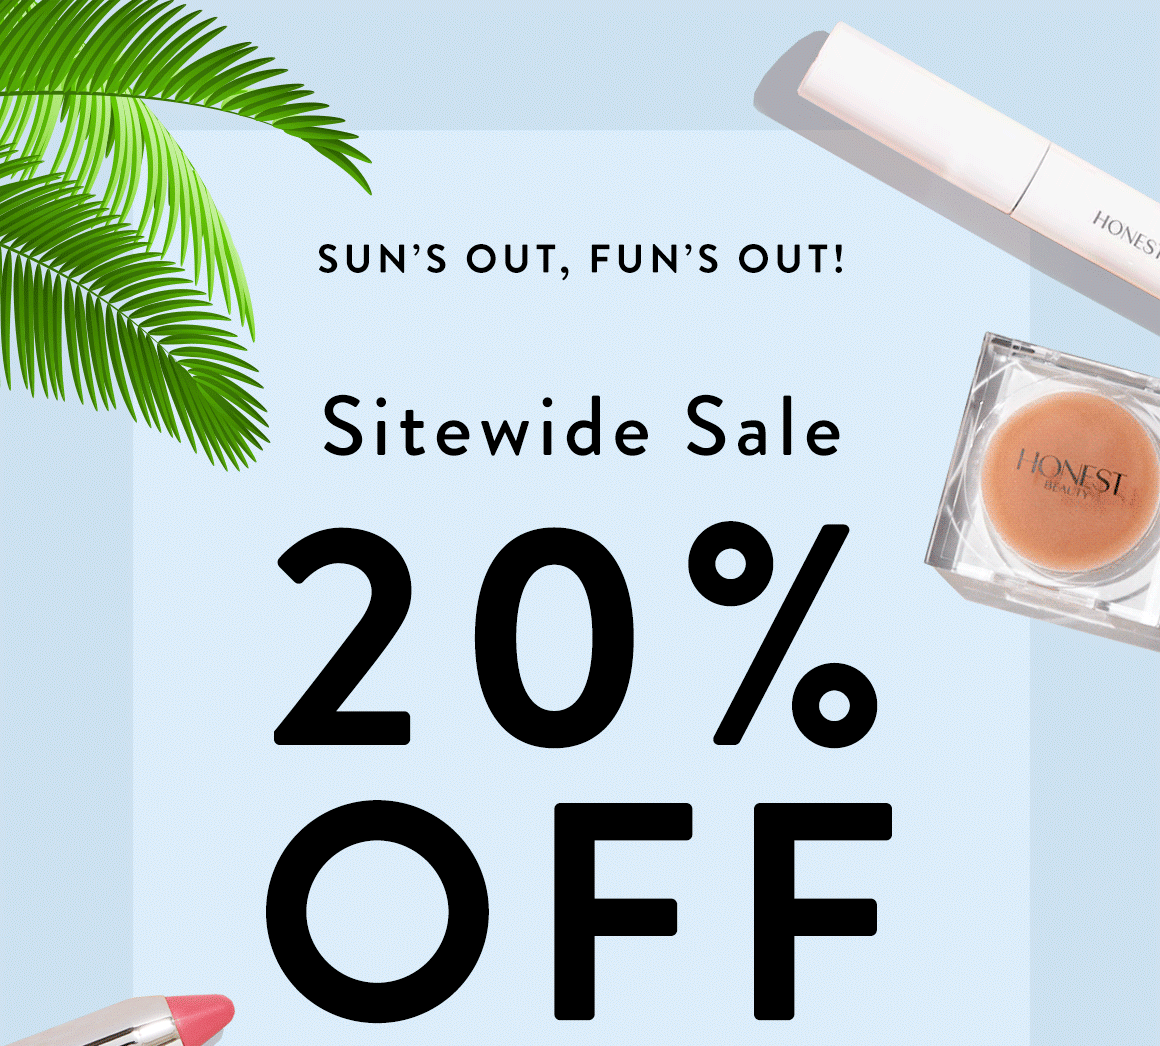 Honest Beauty Coupon – 20% Off Sitewide!